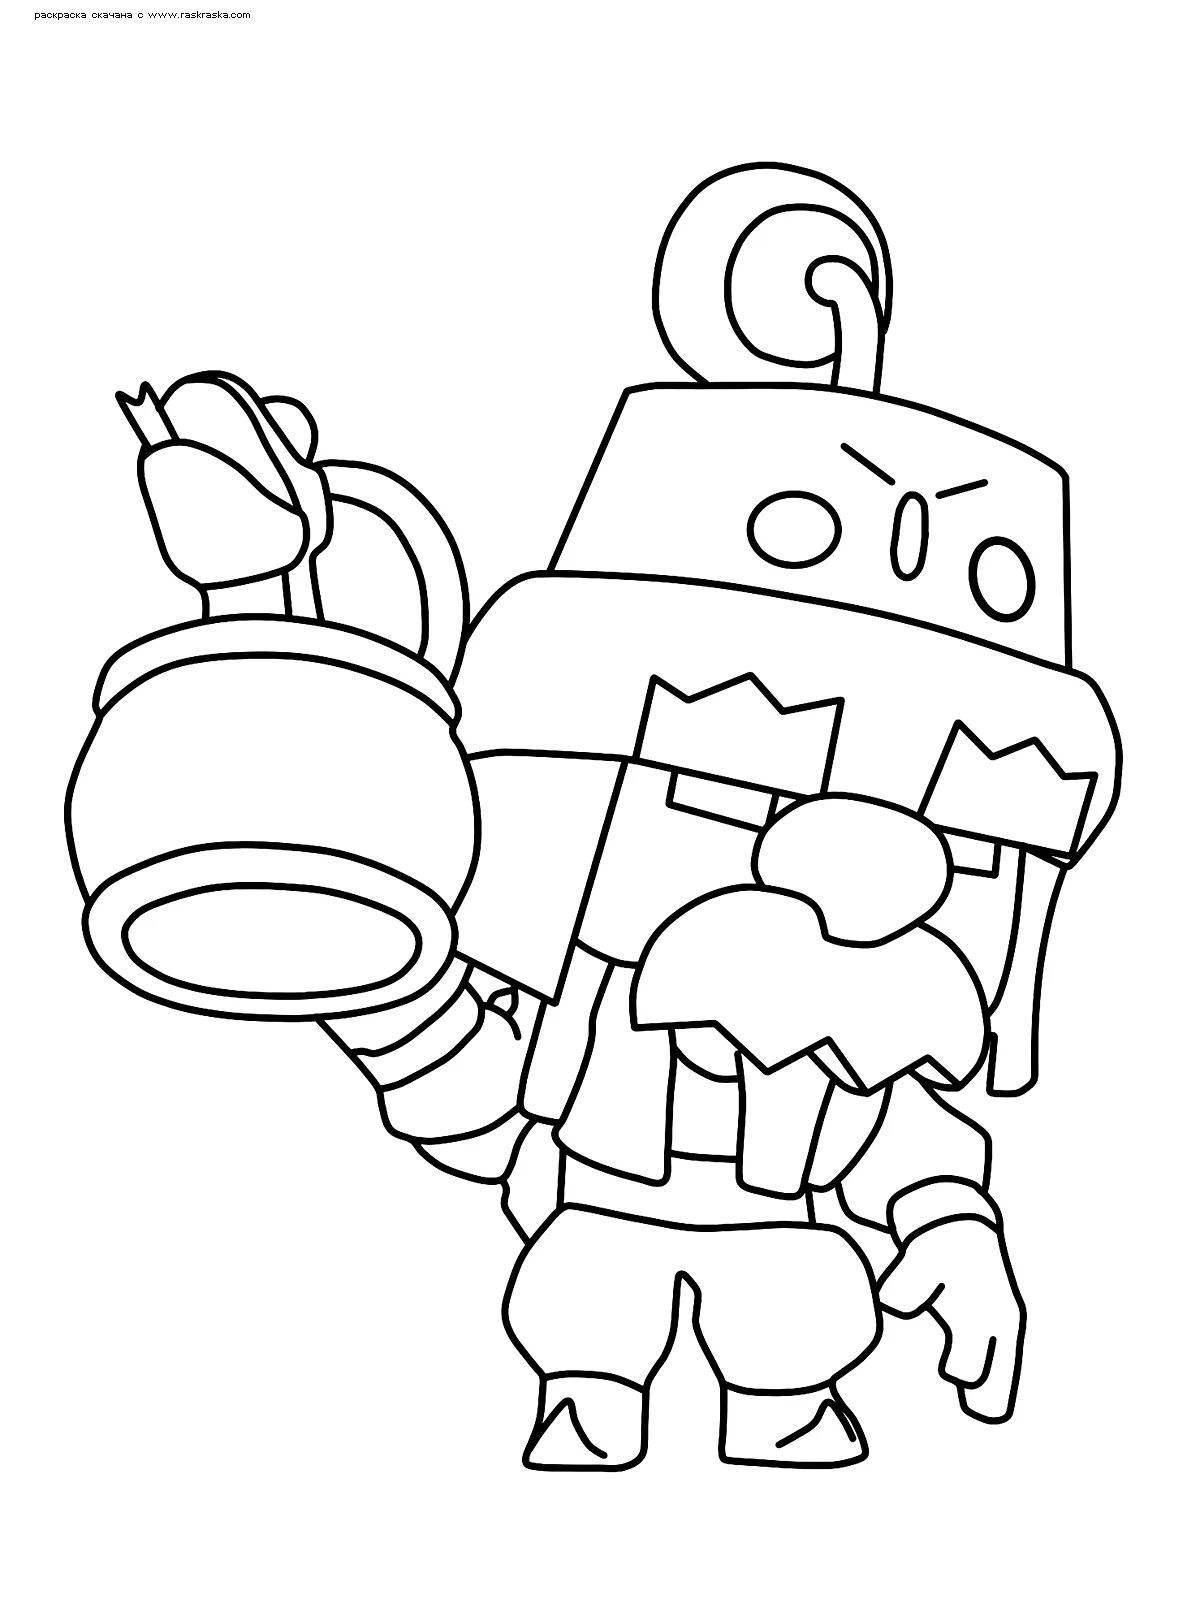 Colorful-detailed gale coloring page